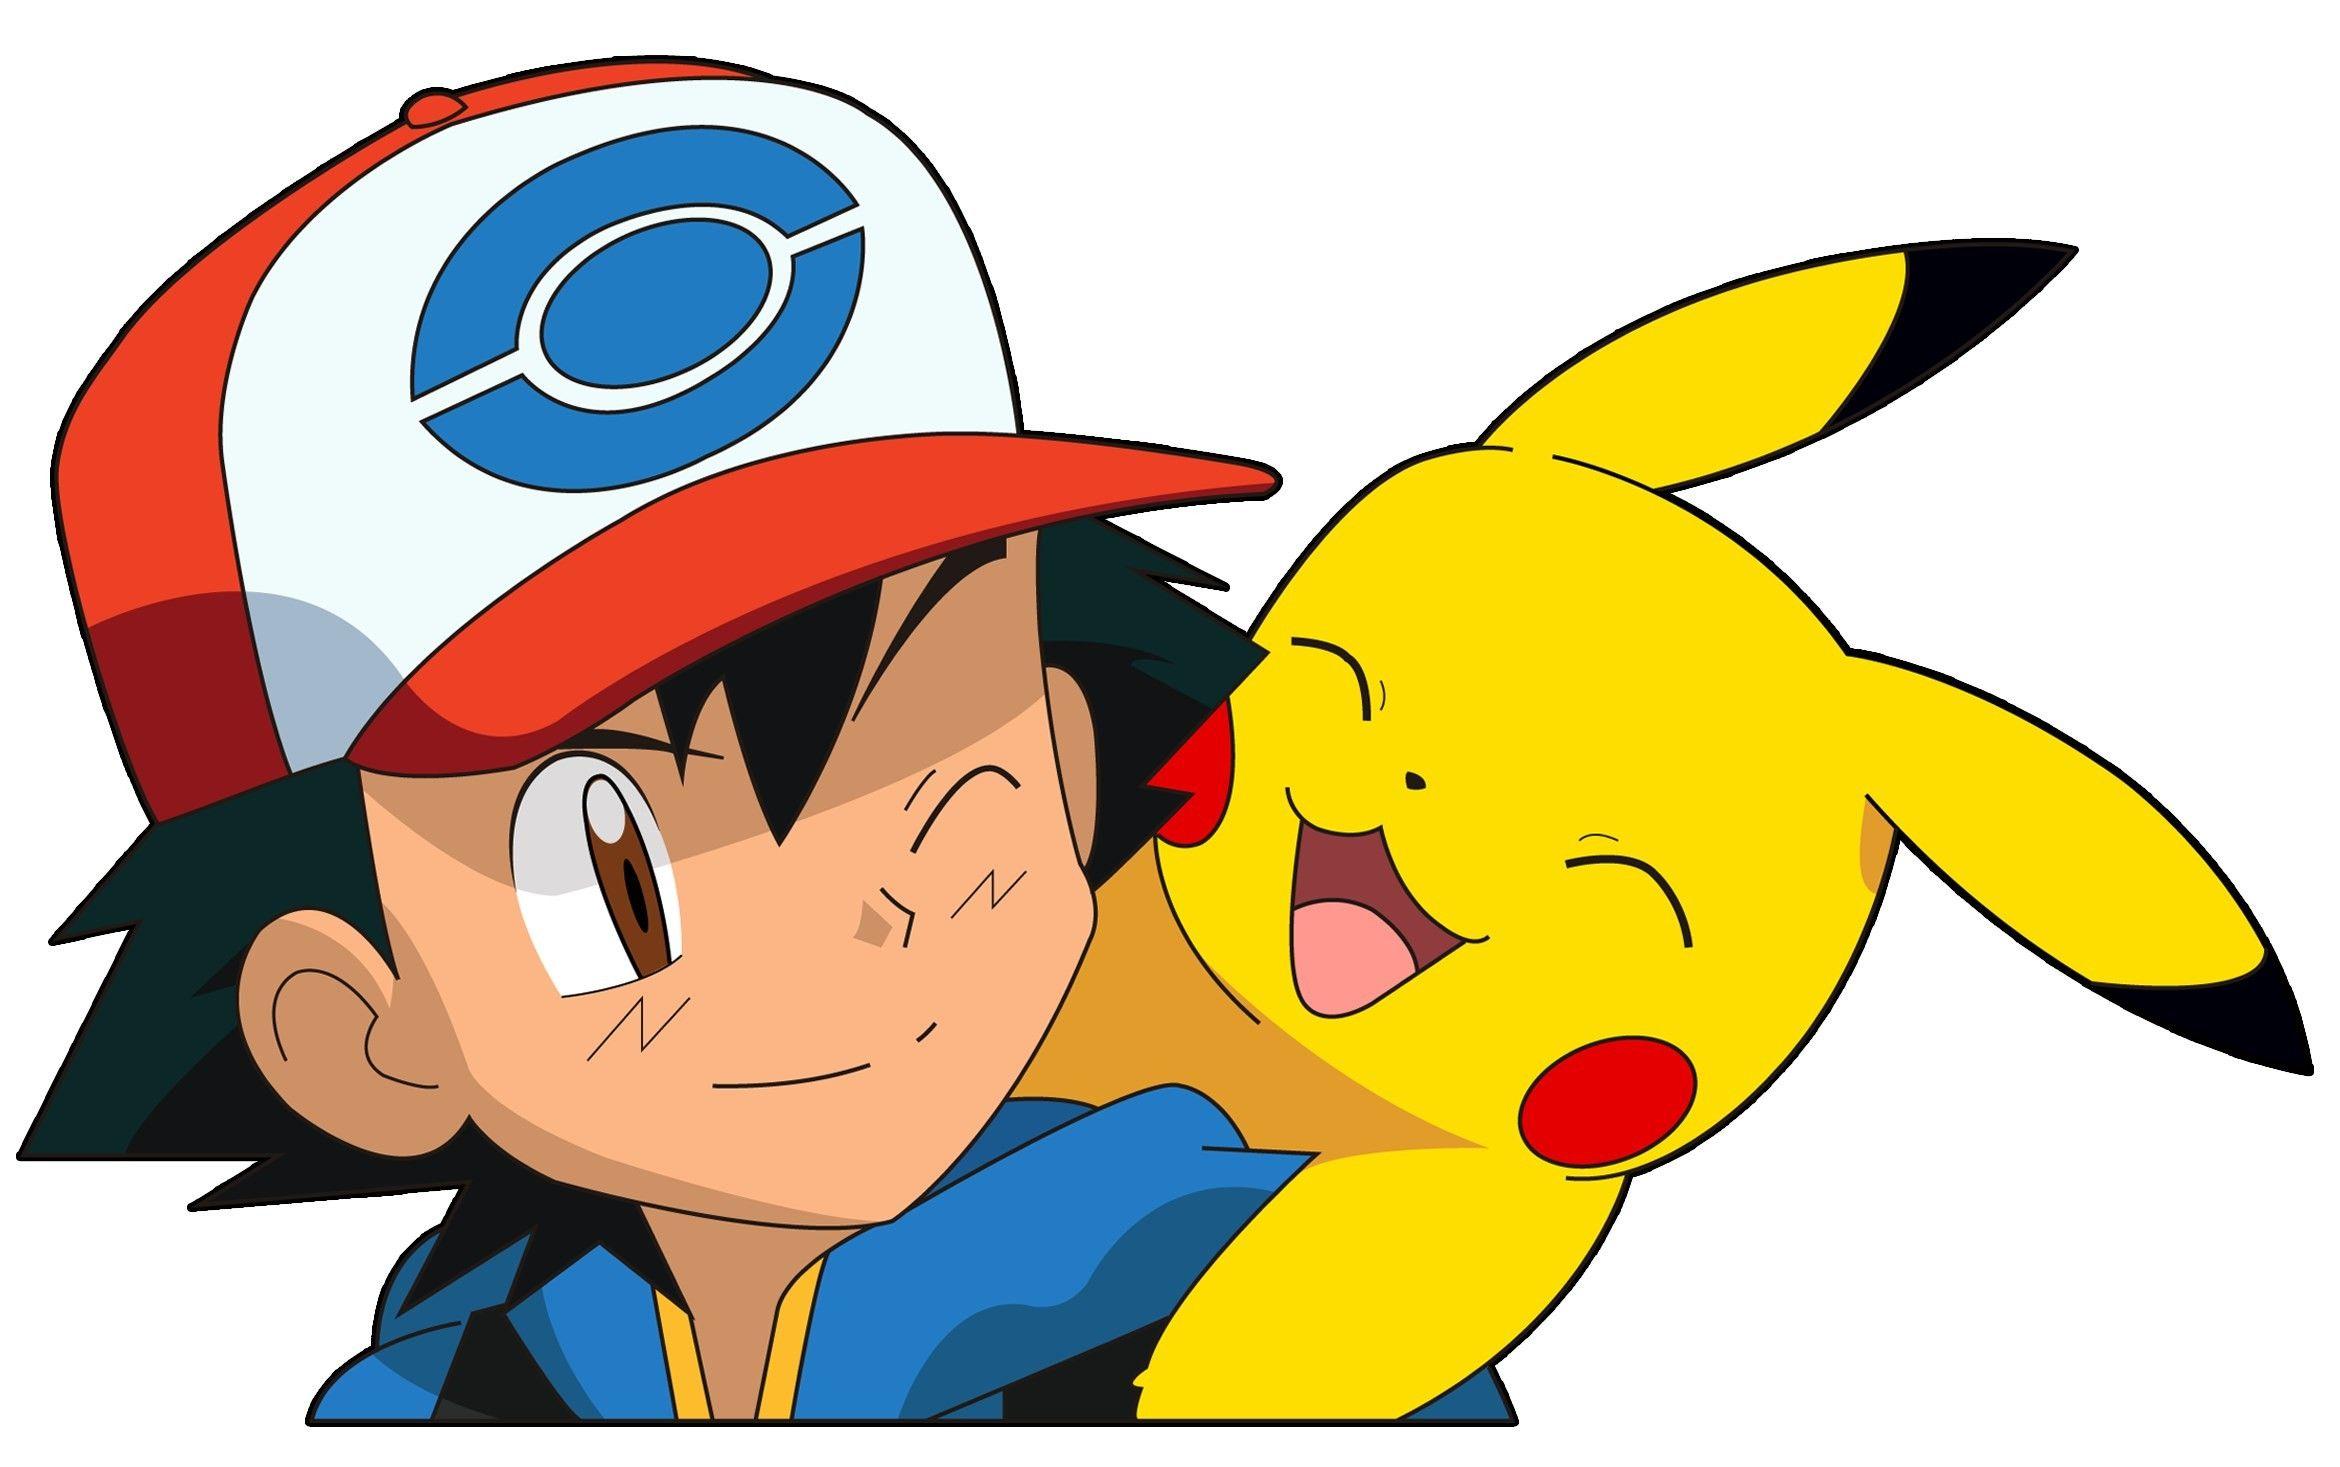 100+] Ash And Pikachu Wallpapers